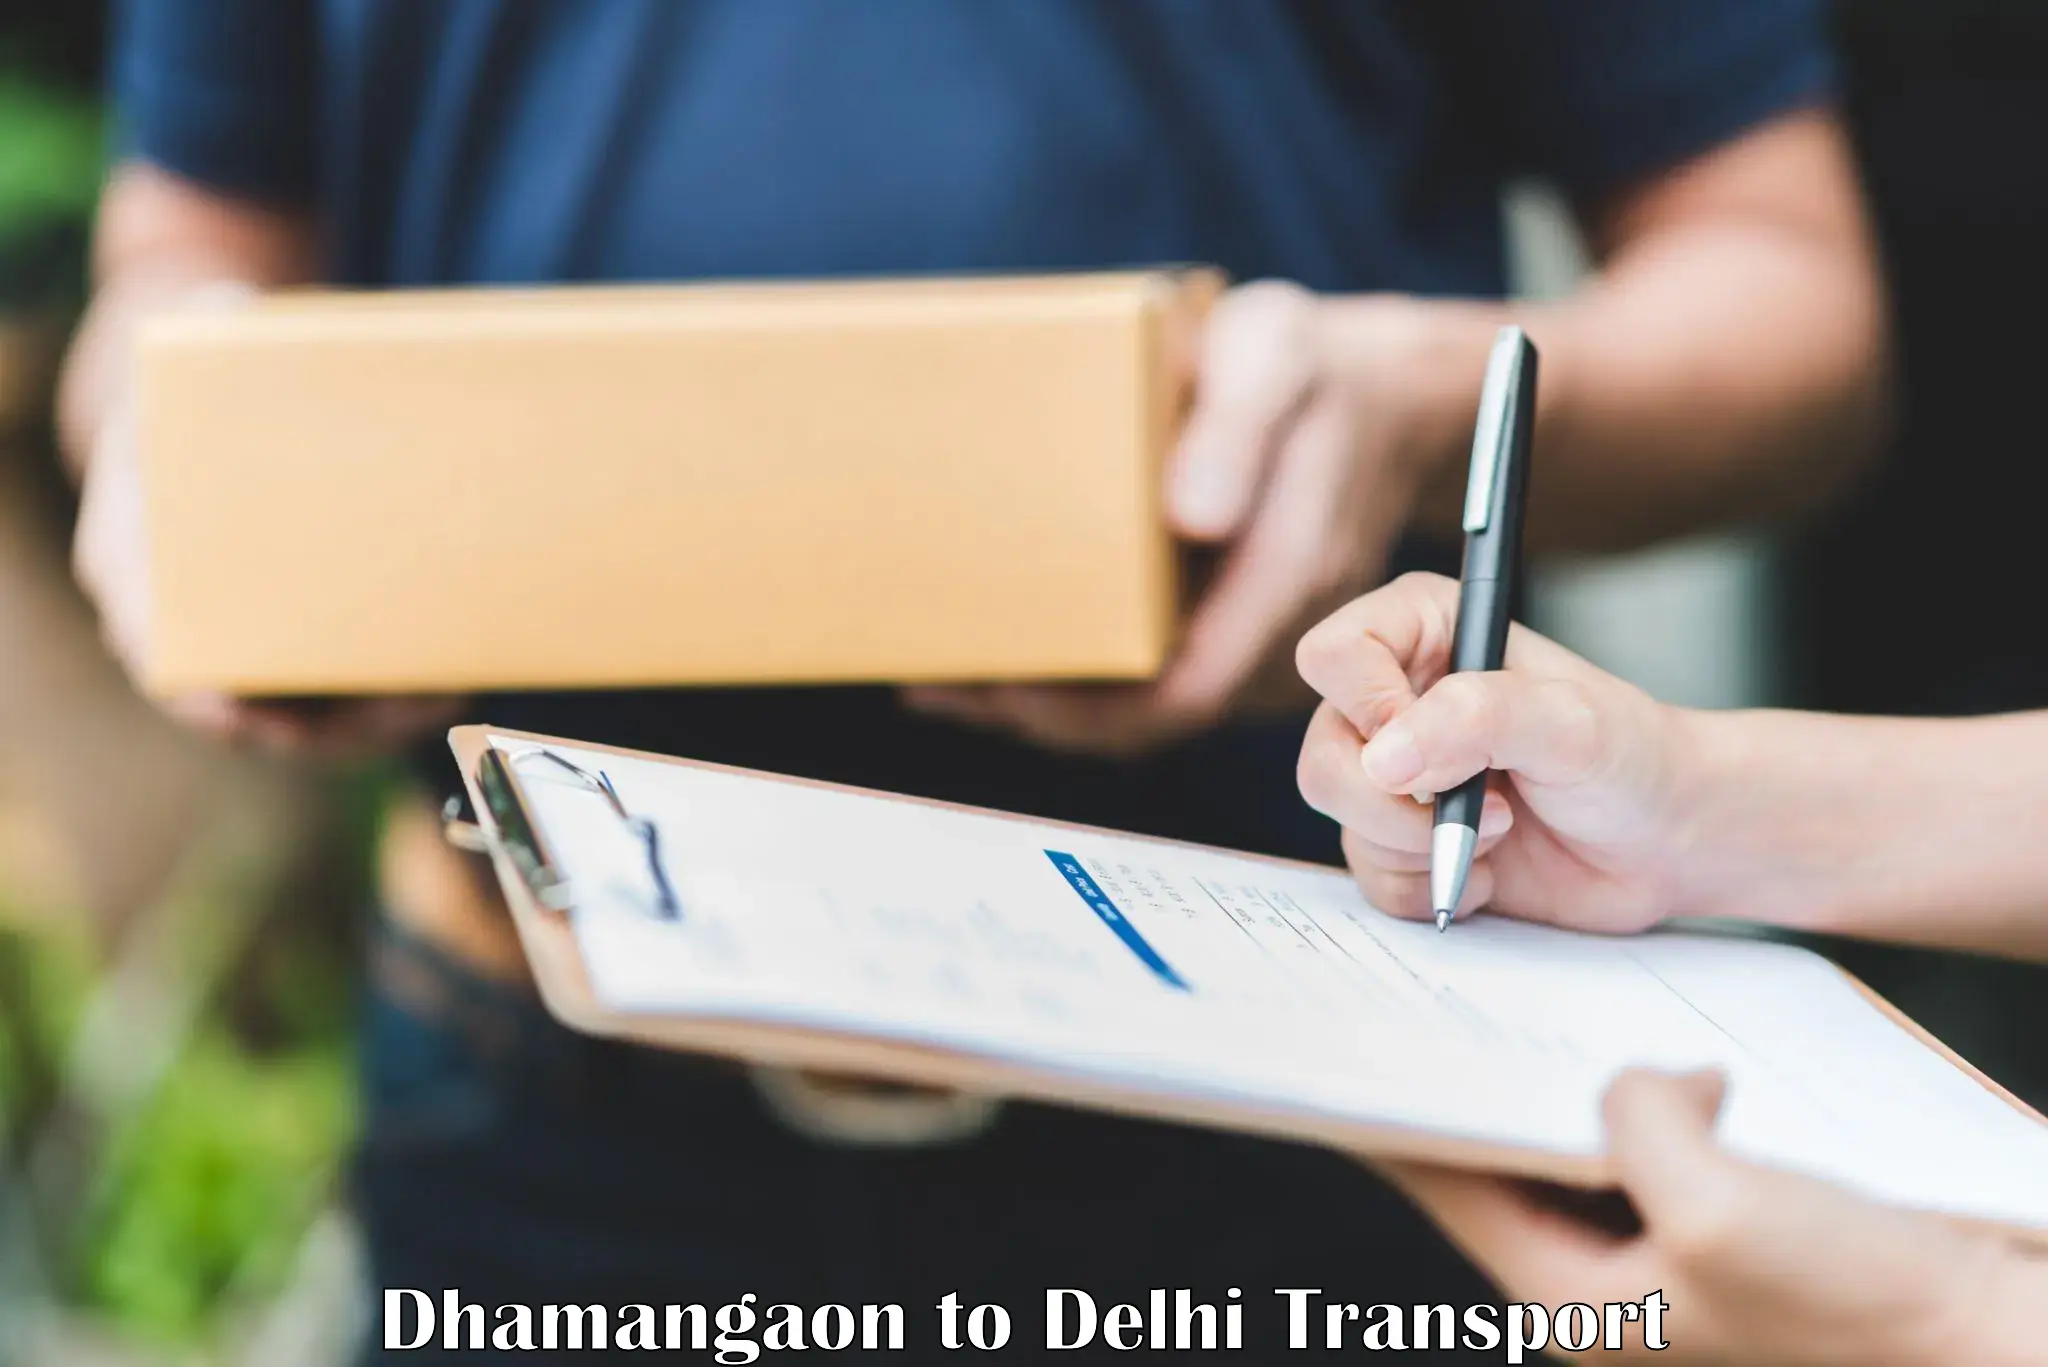 Delivery service Dhamangaon to Delhi